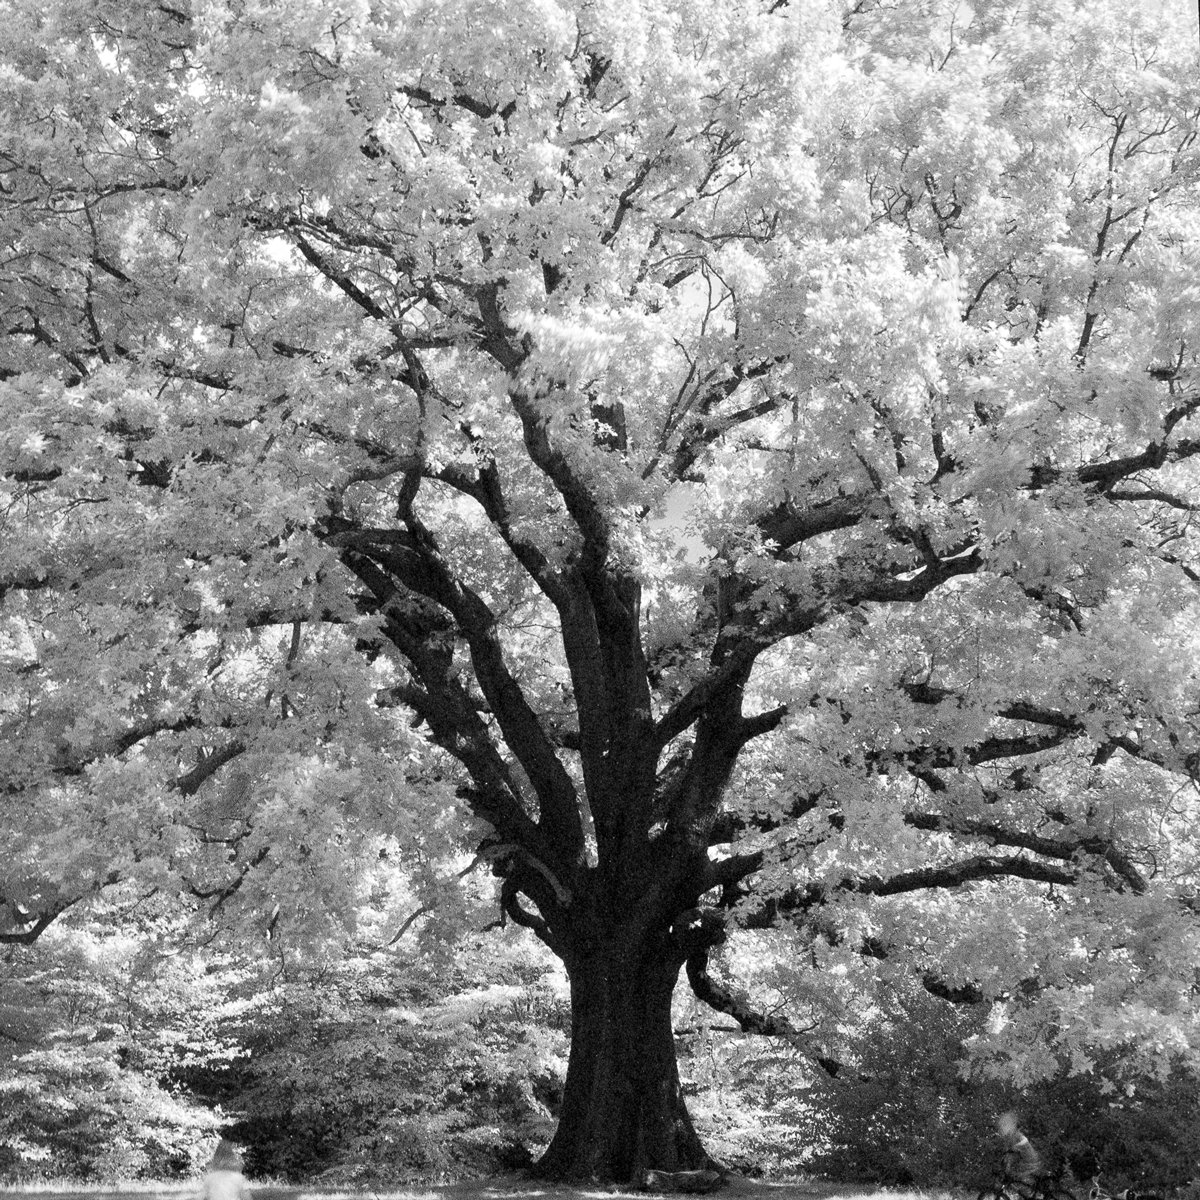 Oak Tree, Infrared effect. Taken on a Bronica SQAi with Ilford SFX 200 and a 720 filter. Developed Ilford DD-X 1+4.